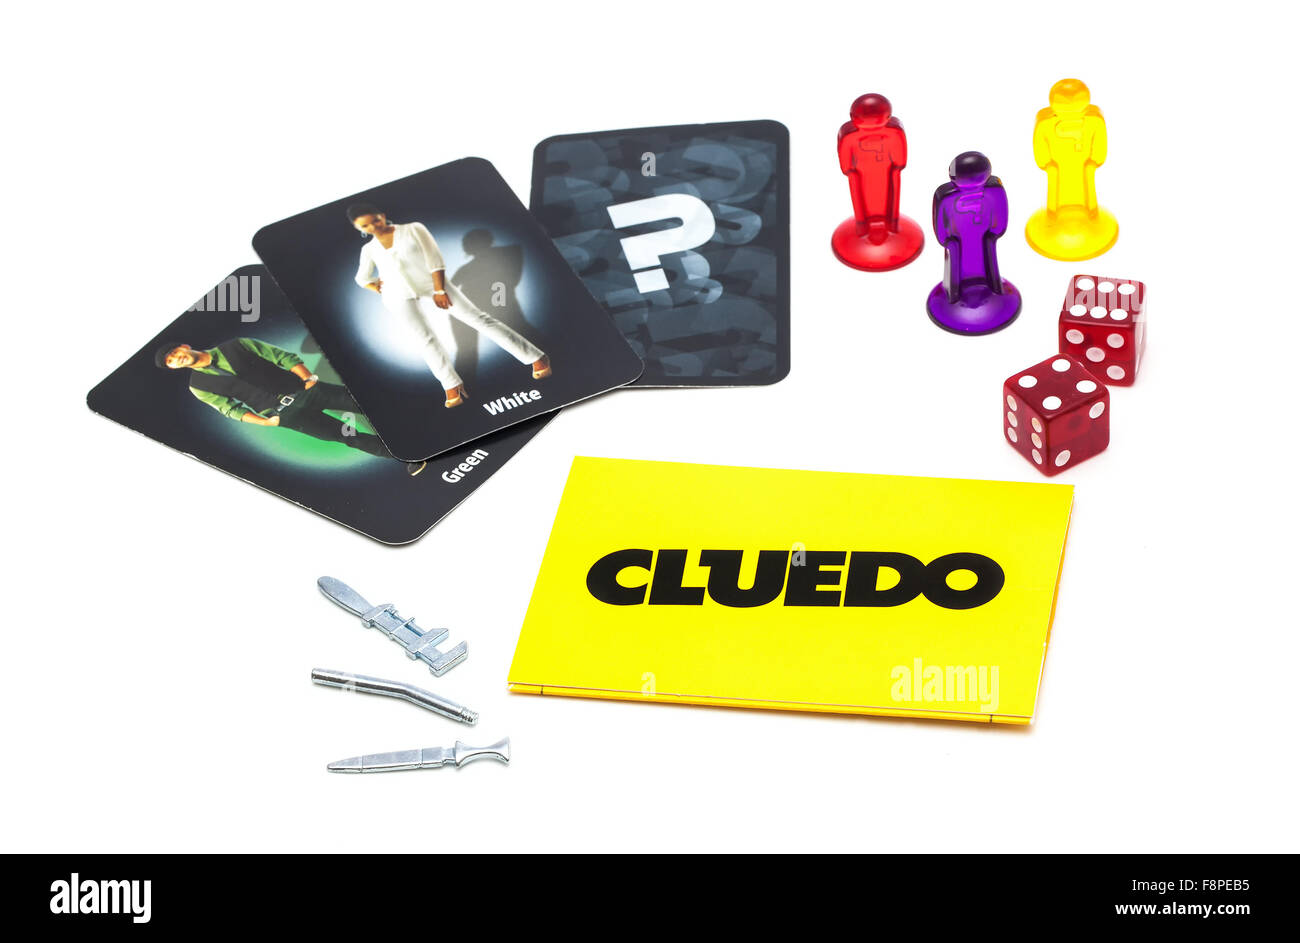 Cluedo Classic murder mystery game for three to six players on a